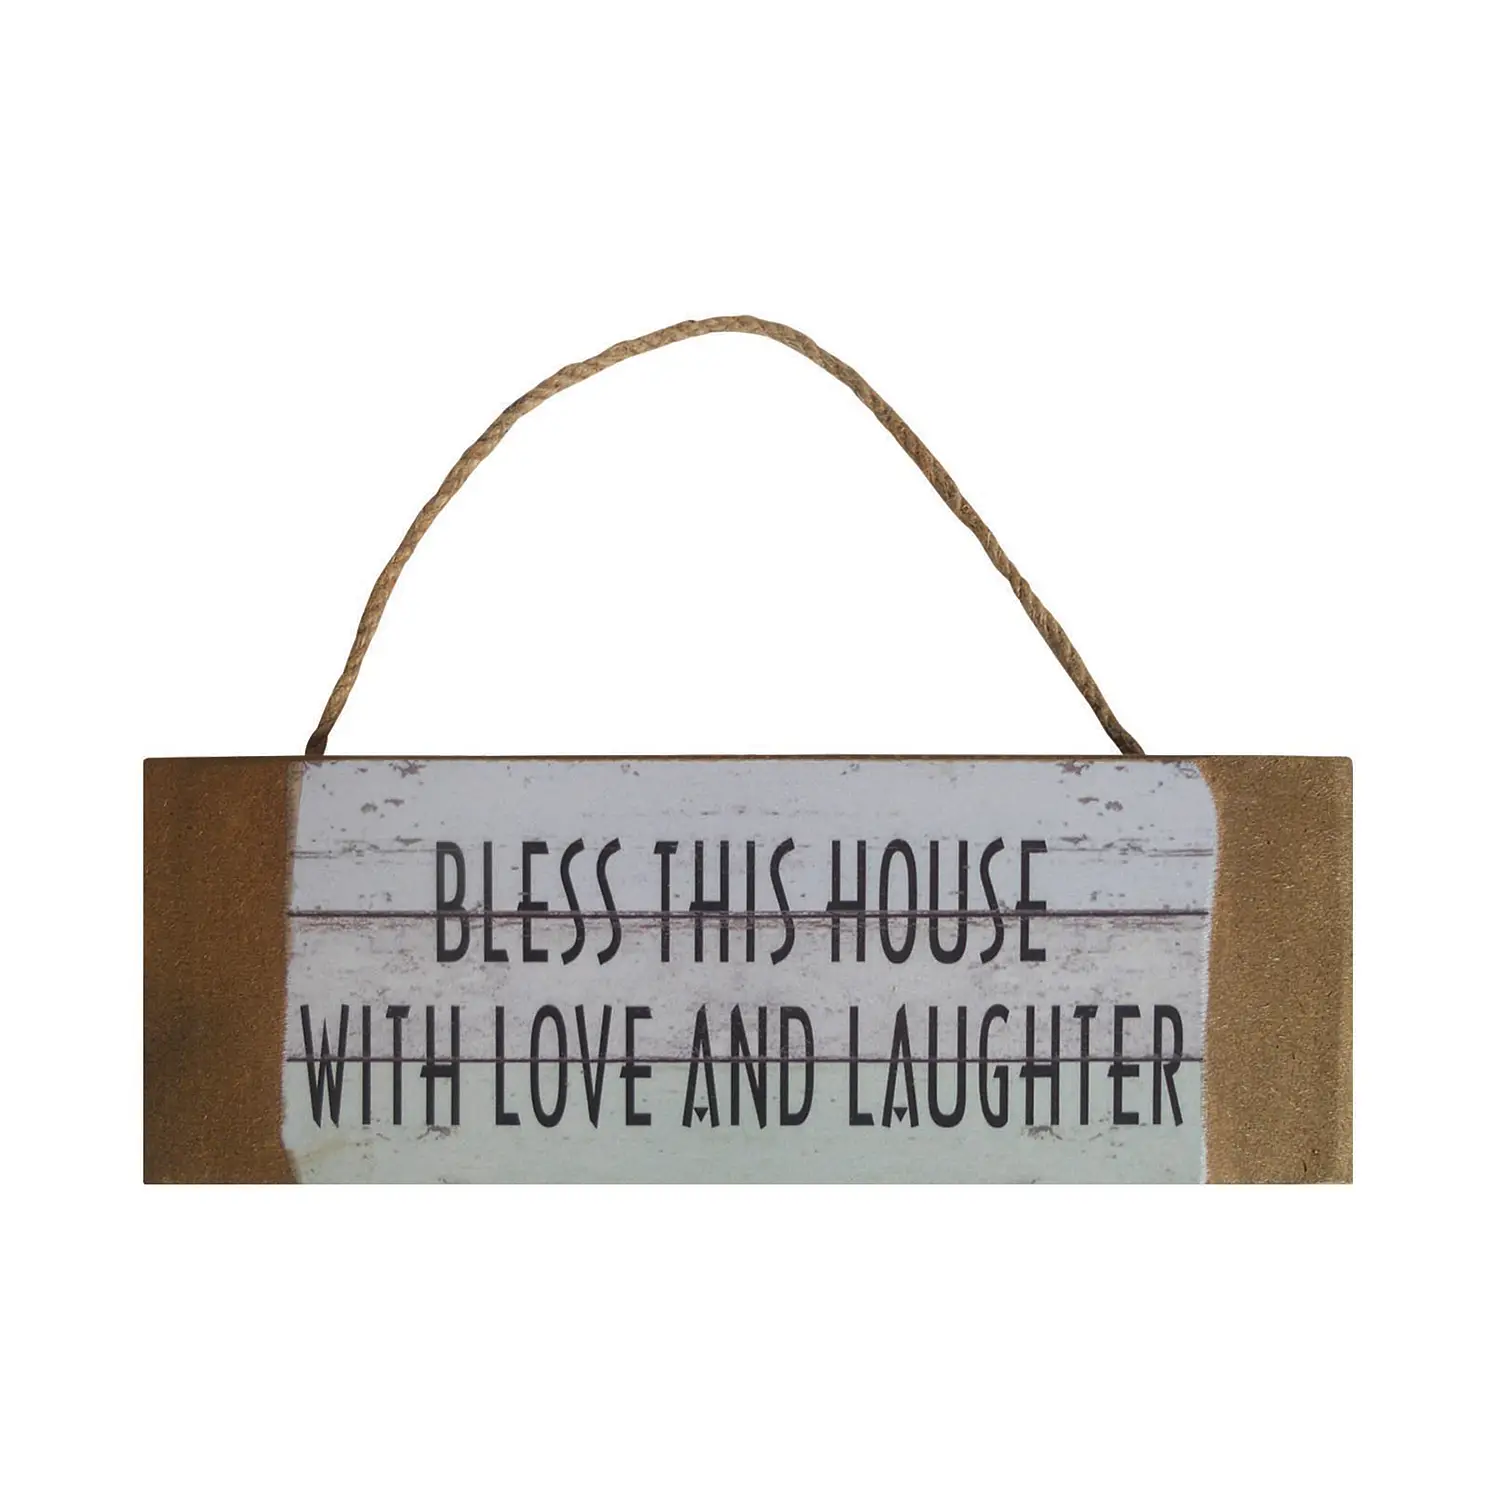 Bless this House Schild